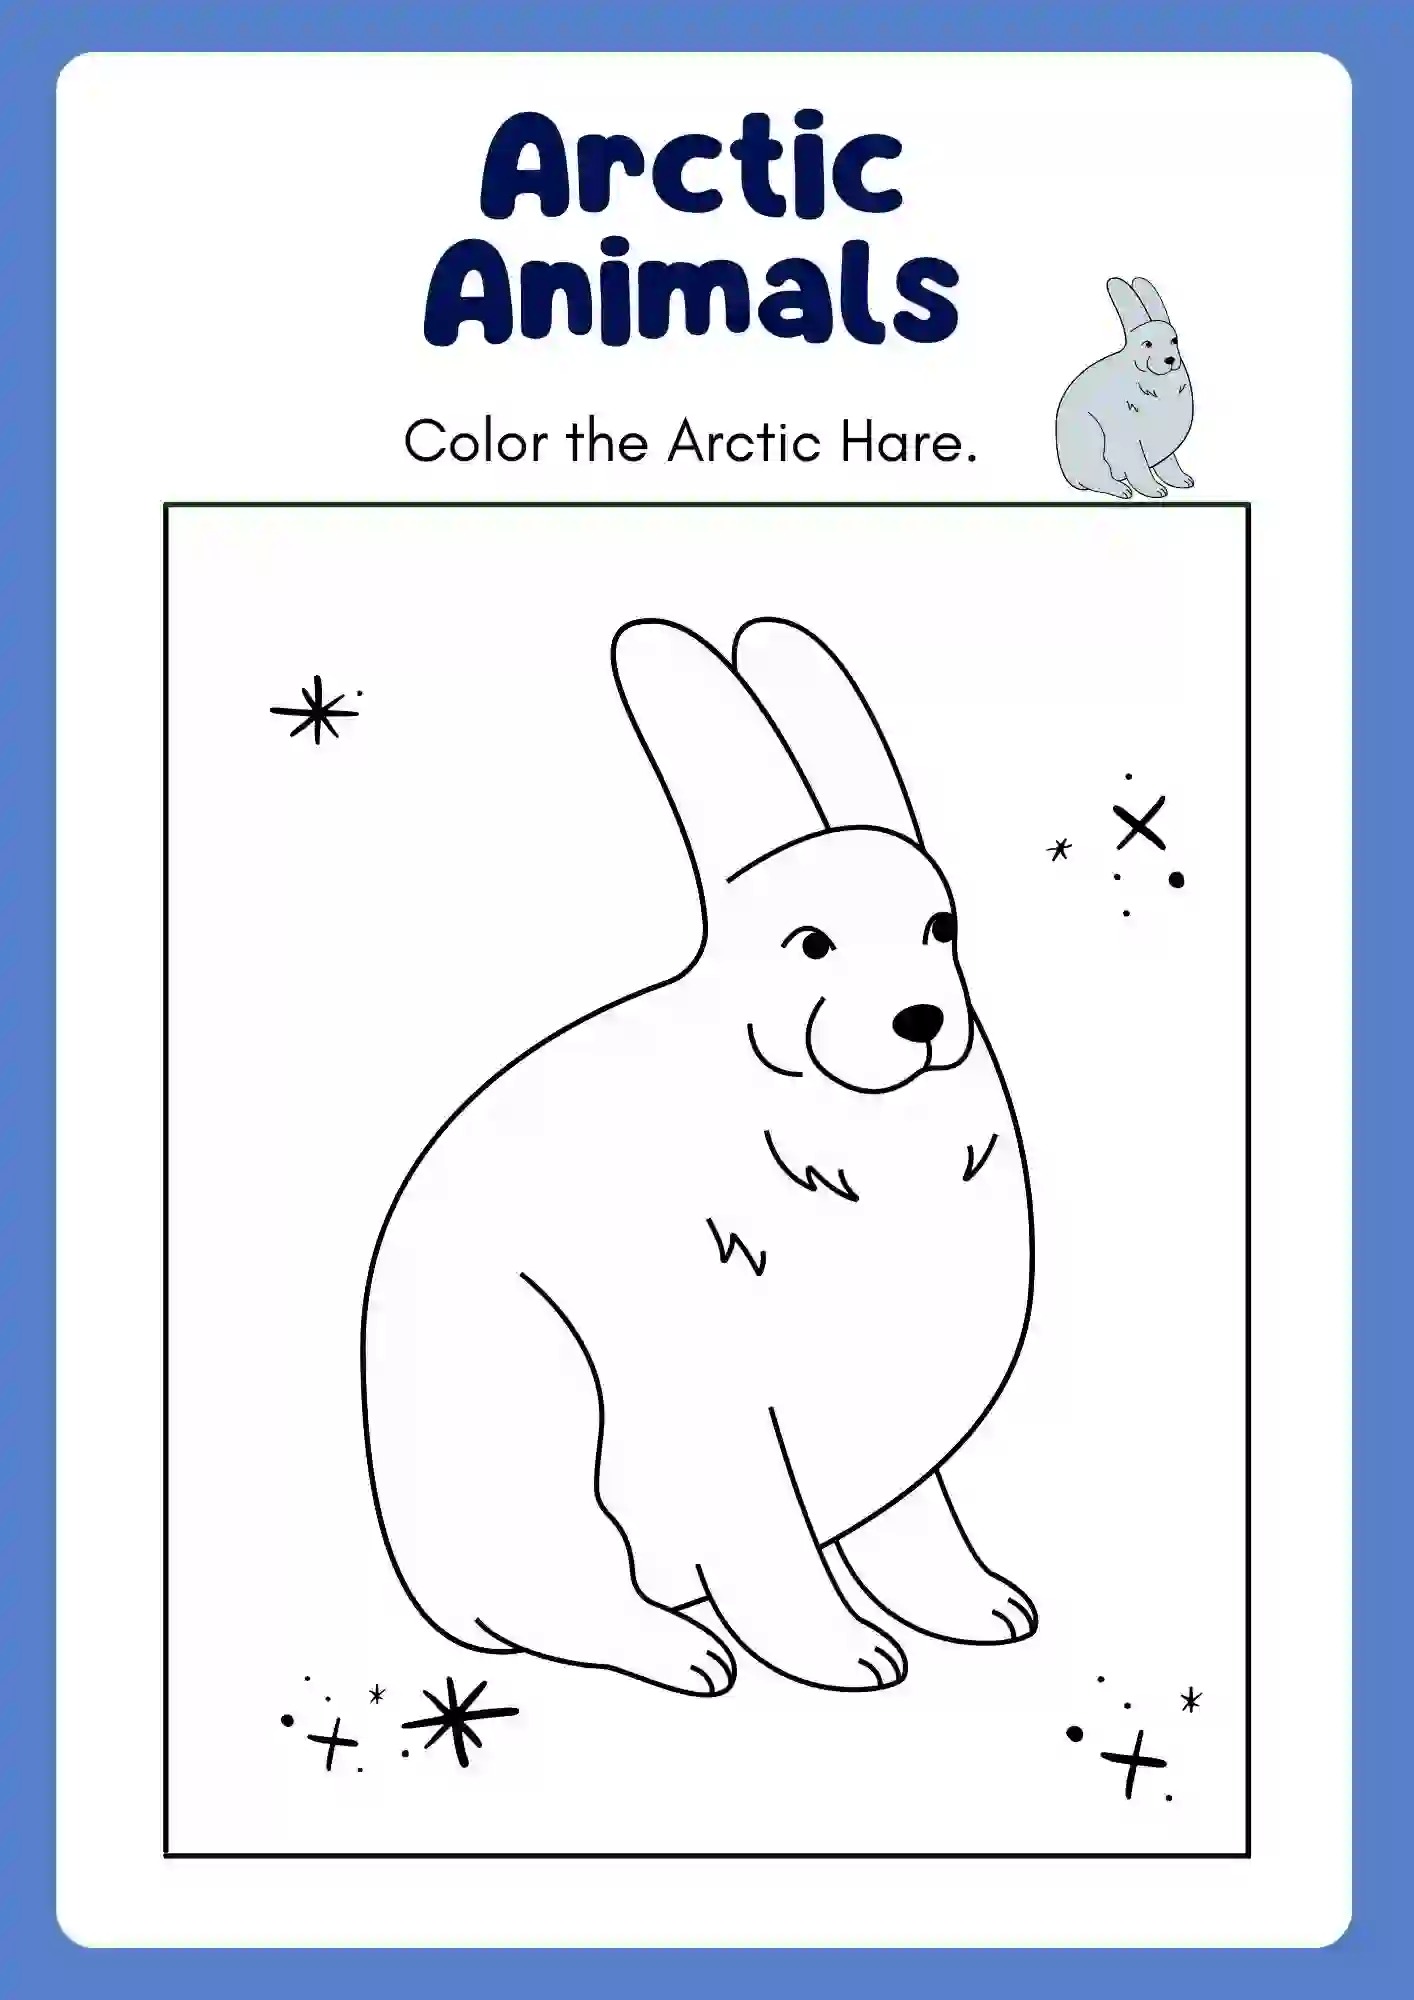 Arctic Animal Coloring Worksheets (ARCTIC HARE)